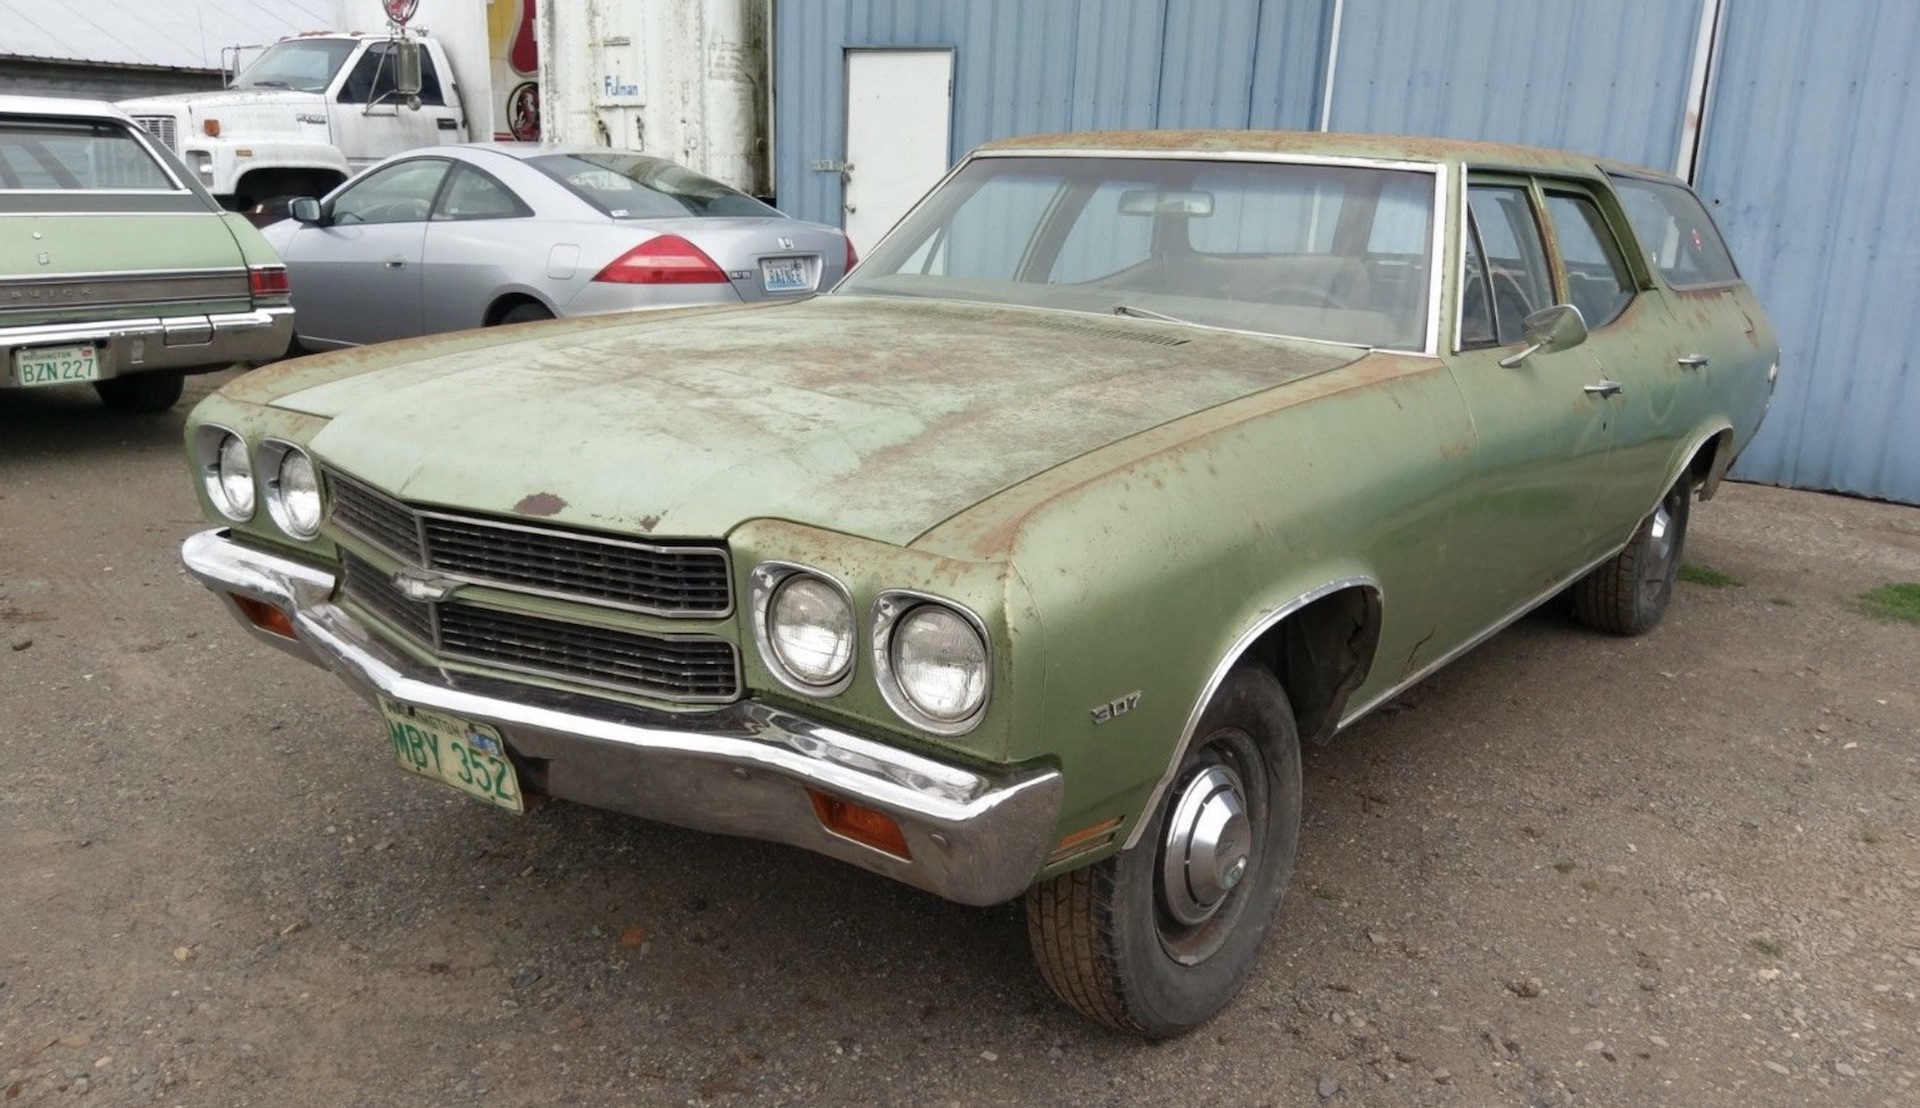 1970 Chevrolet Chevelle Wagon Needs Love, Boasts Potential: eBay Find.